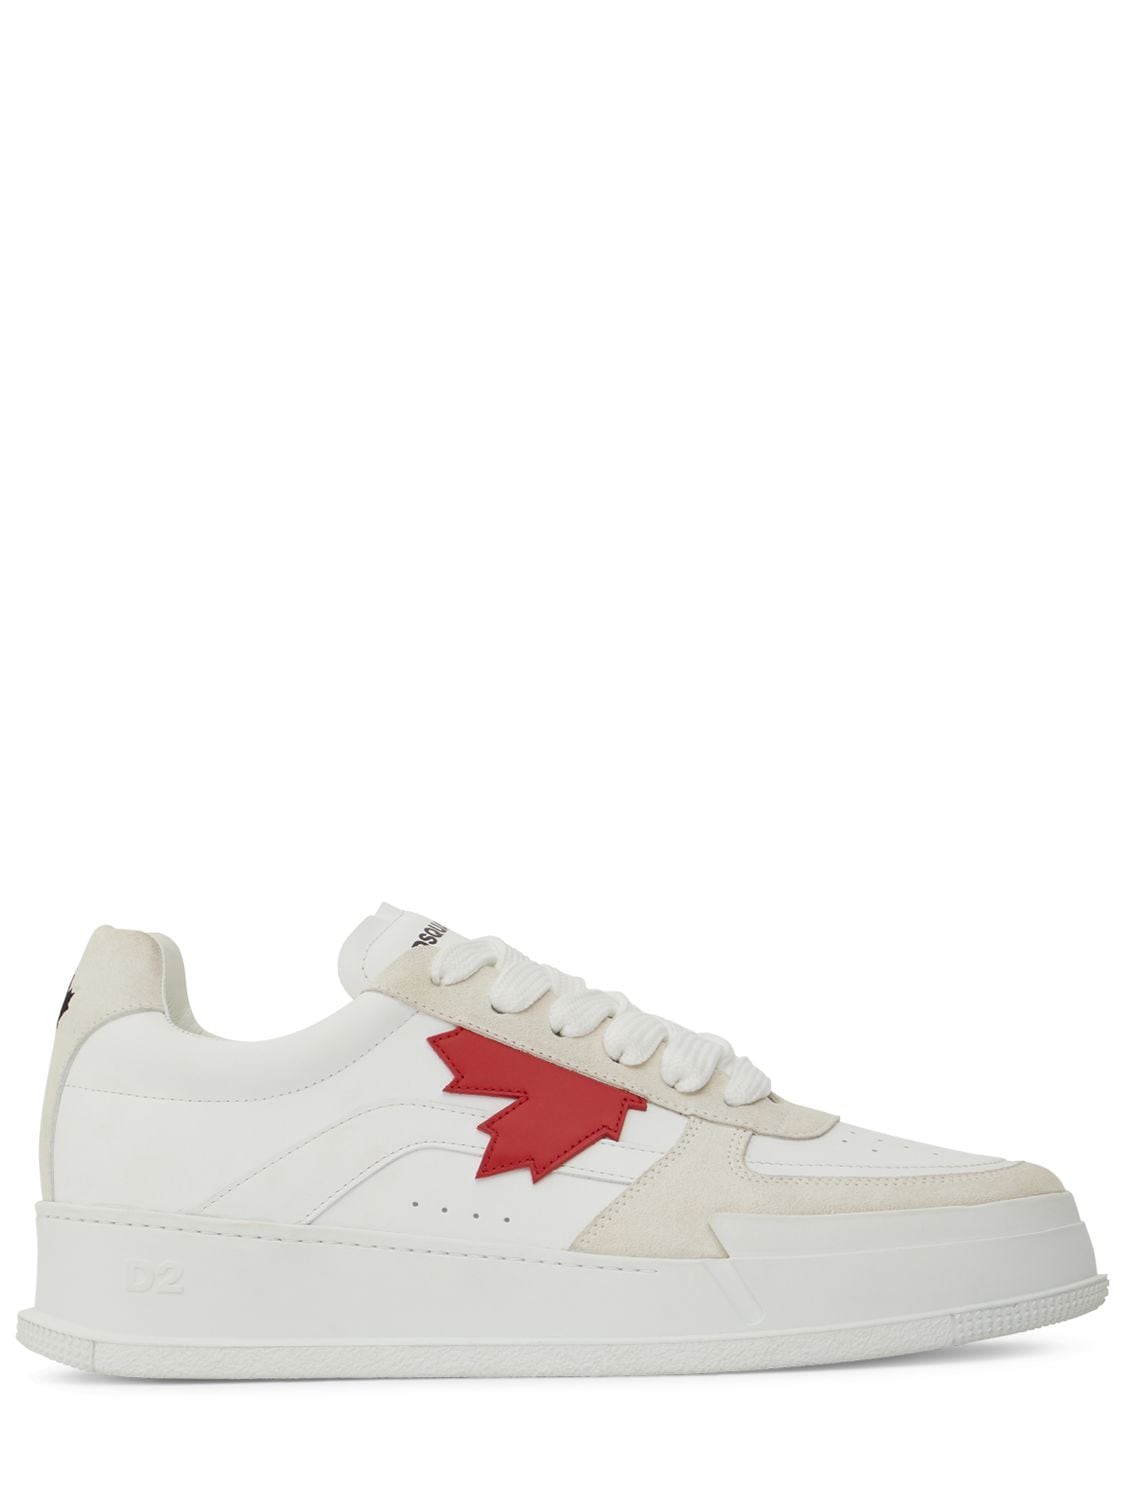 Canadian Leather Low Top Sneakers - DSQUARED2 - Modalova